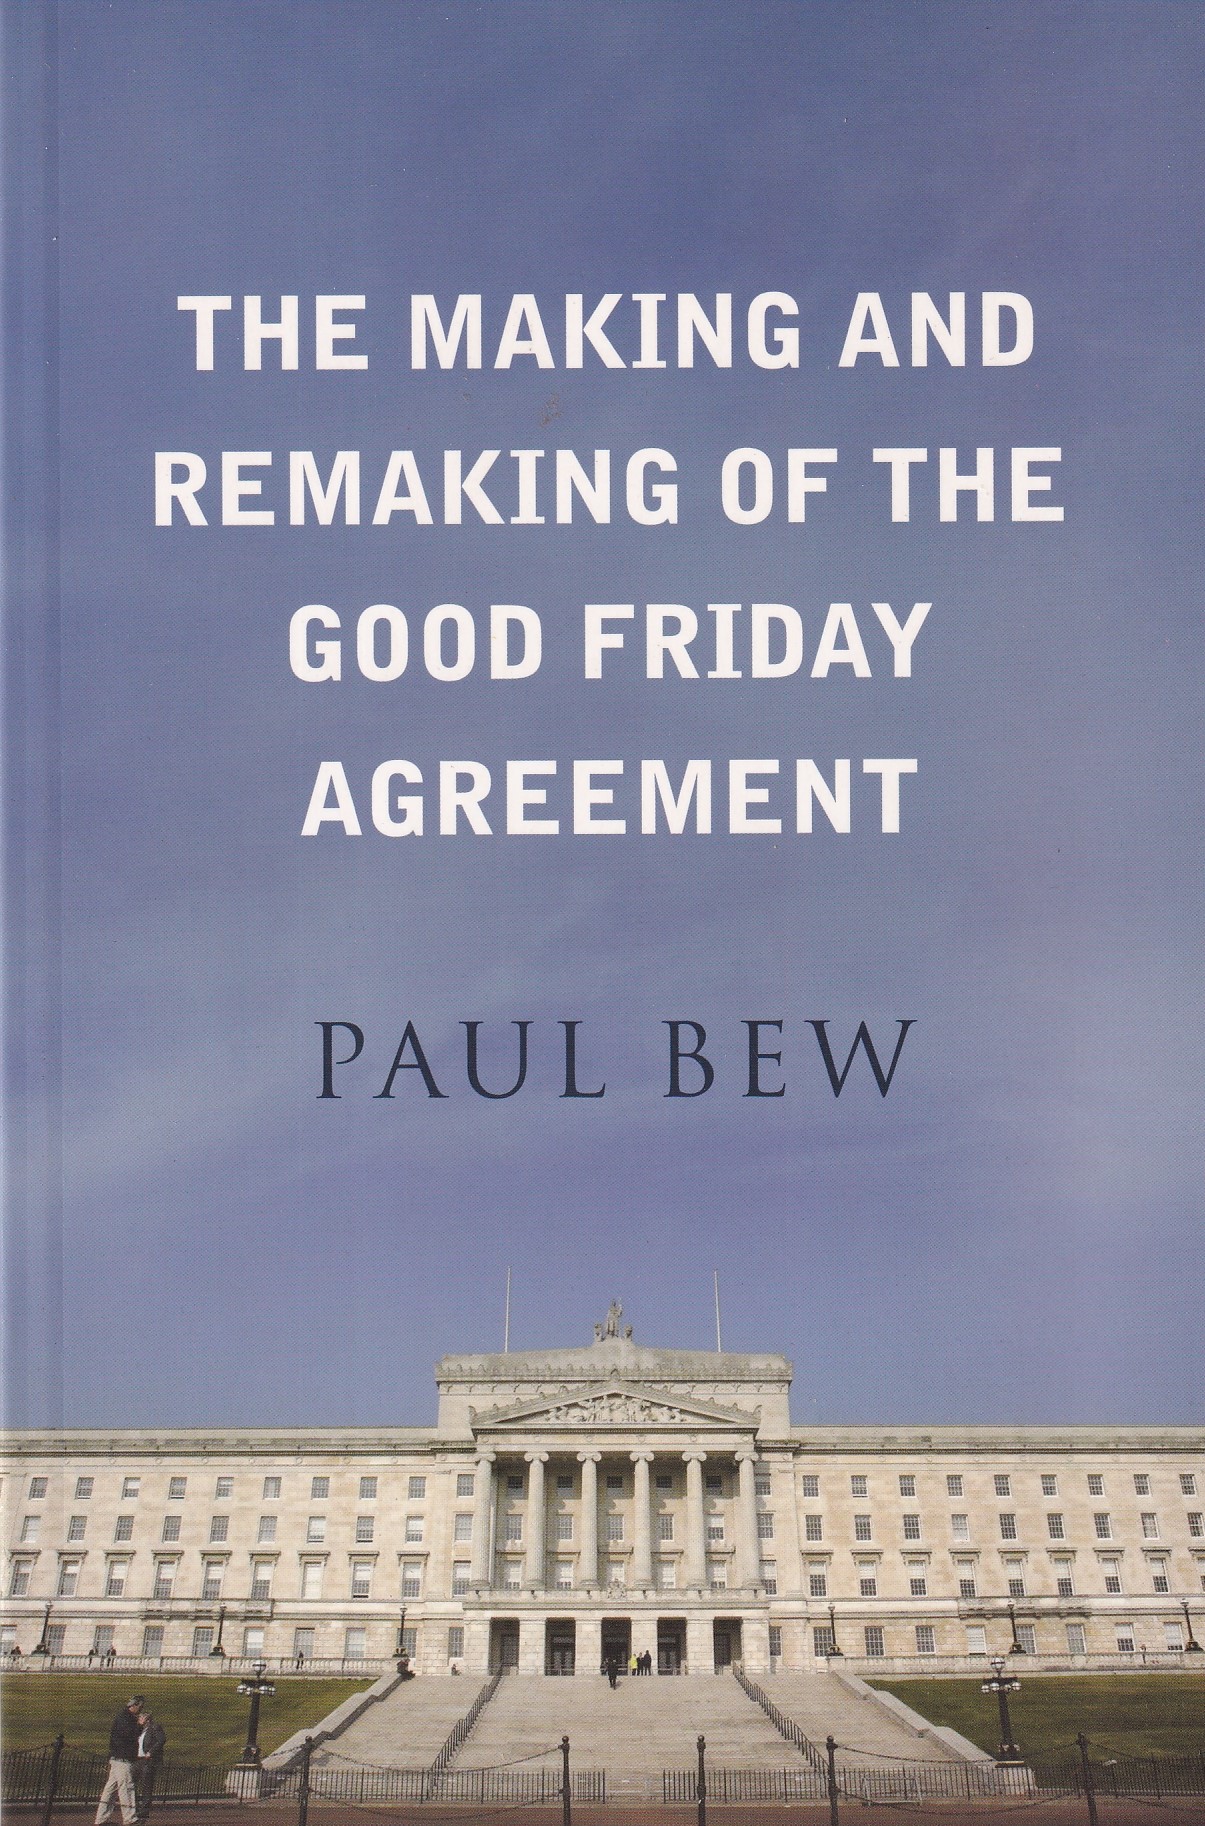 The Making and Remaking of the Good Friday Agreement | Bew, Paul | Charlie Byrne's